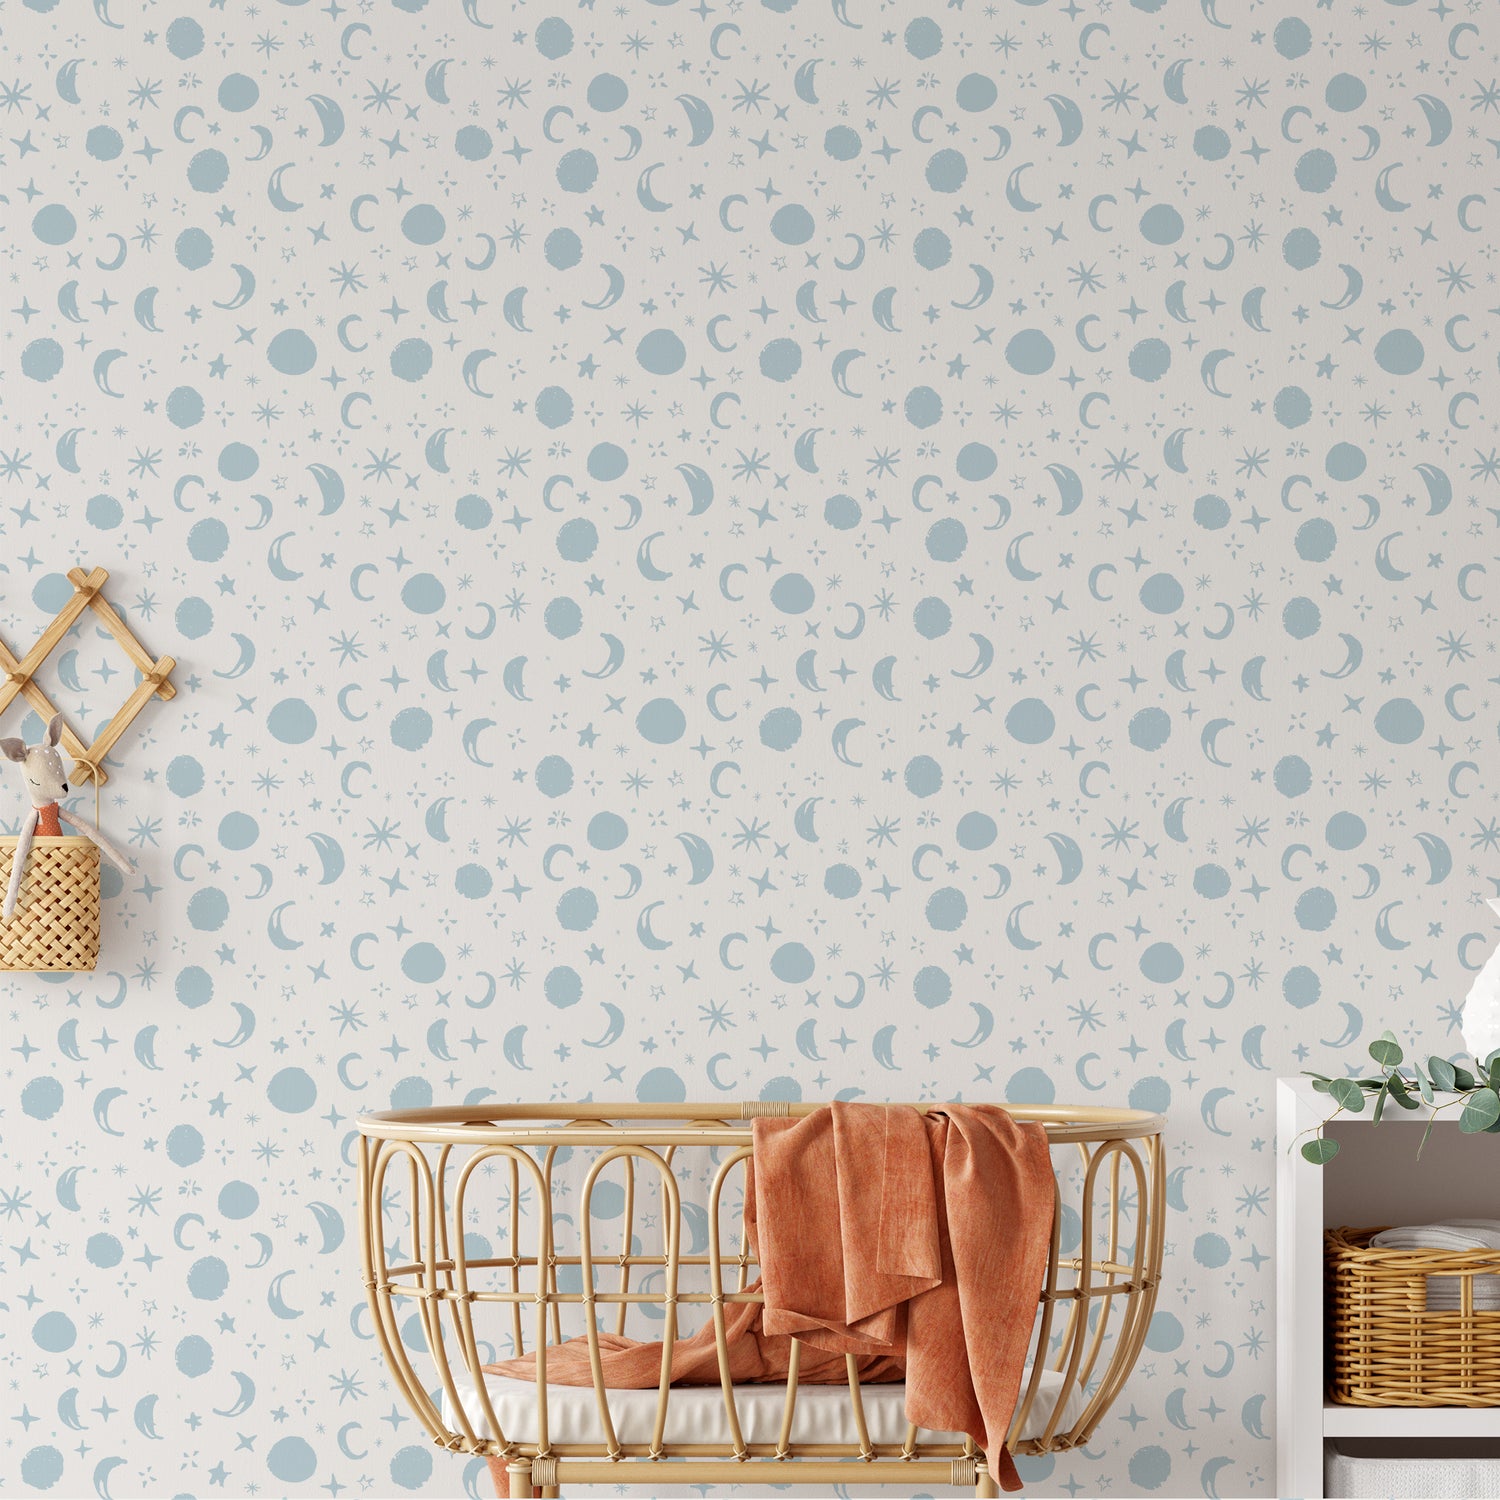 Featured on a nursery wall, Emmett is an inspiring design by our artist Jackie O"Bosky. The carefully created moons and stars will bring positive energy to any space. 